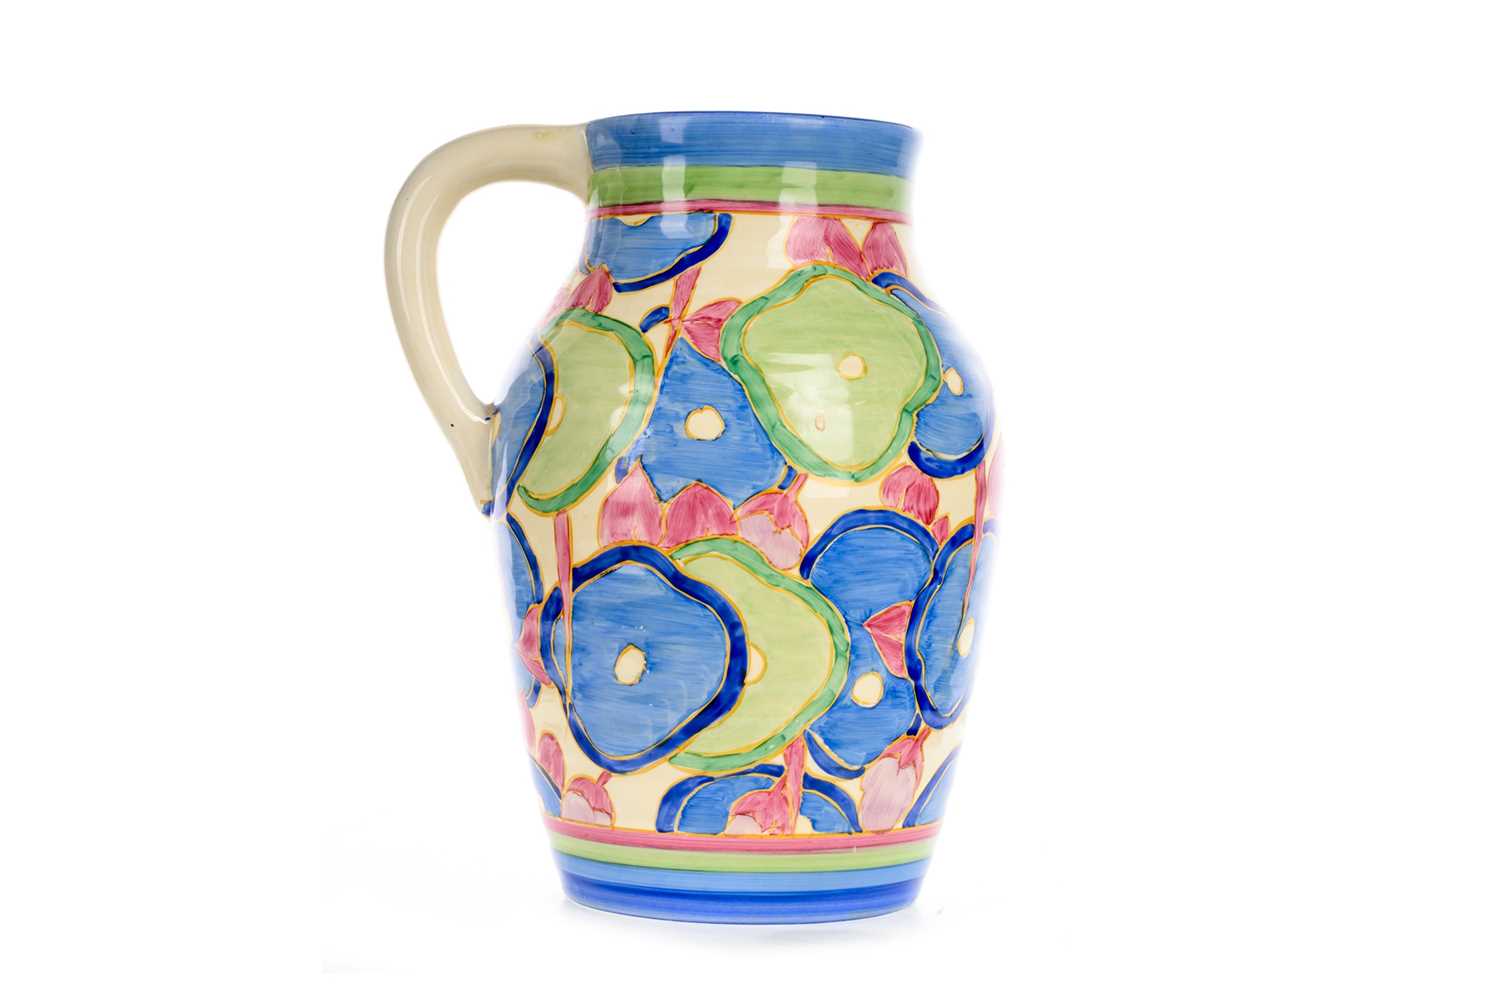 CLARICE CLIFF FOR NEWPORT POTTERY, 'BLUE CHINTZ' ISIS JUG, CIRCA 1930-39